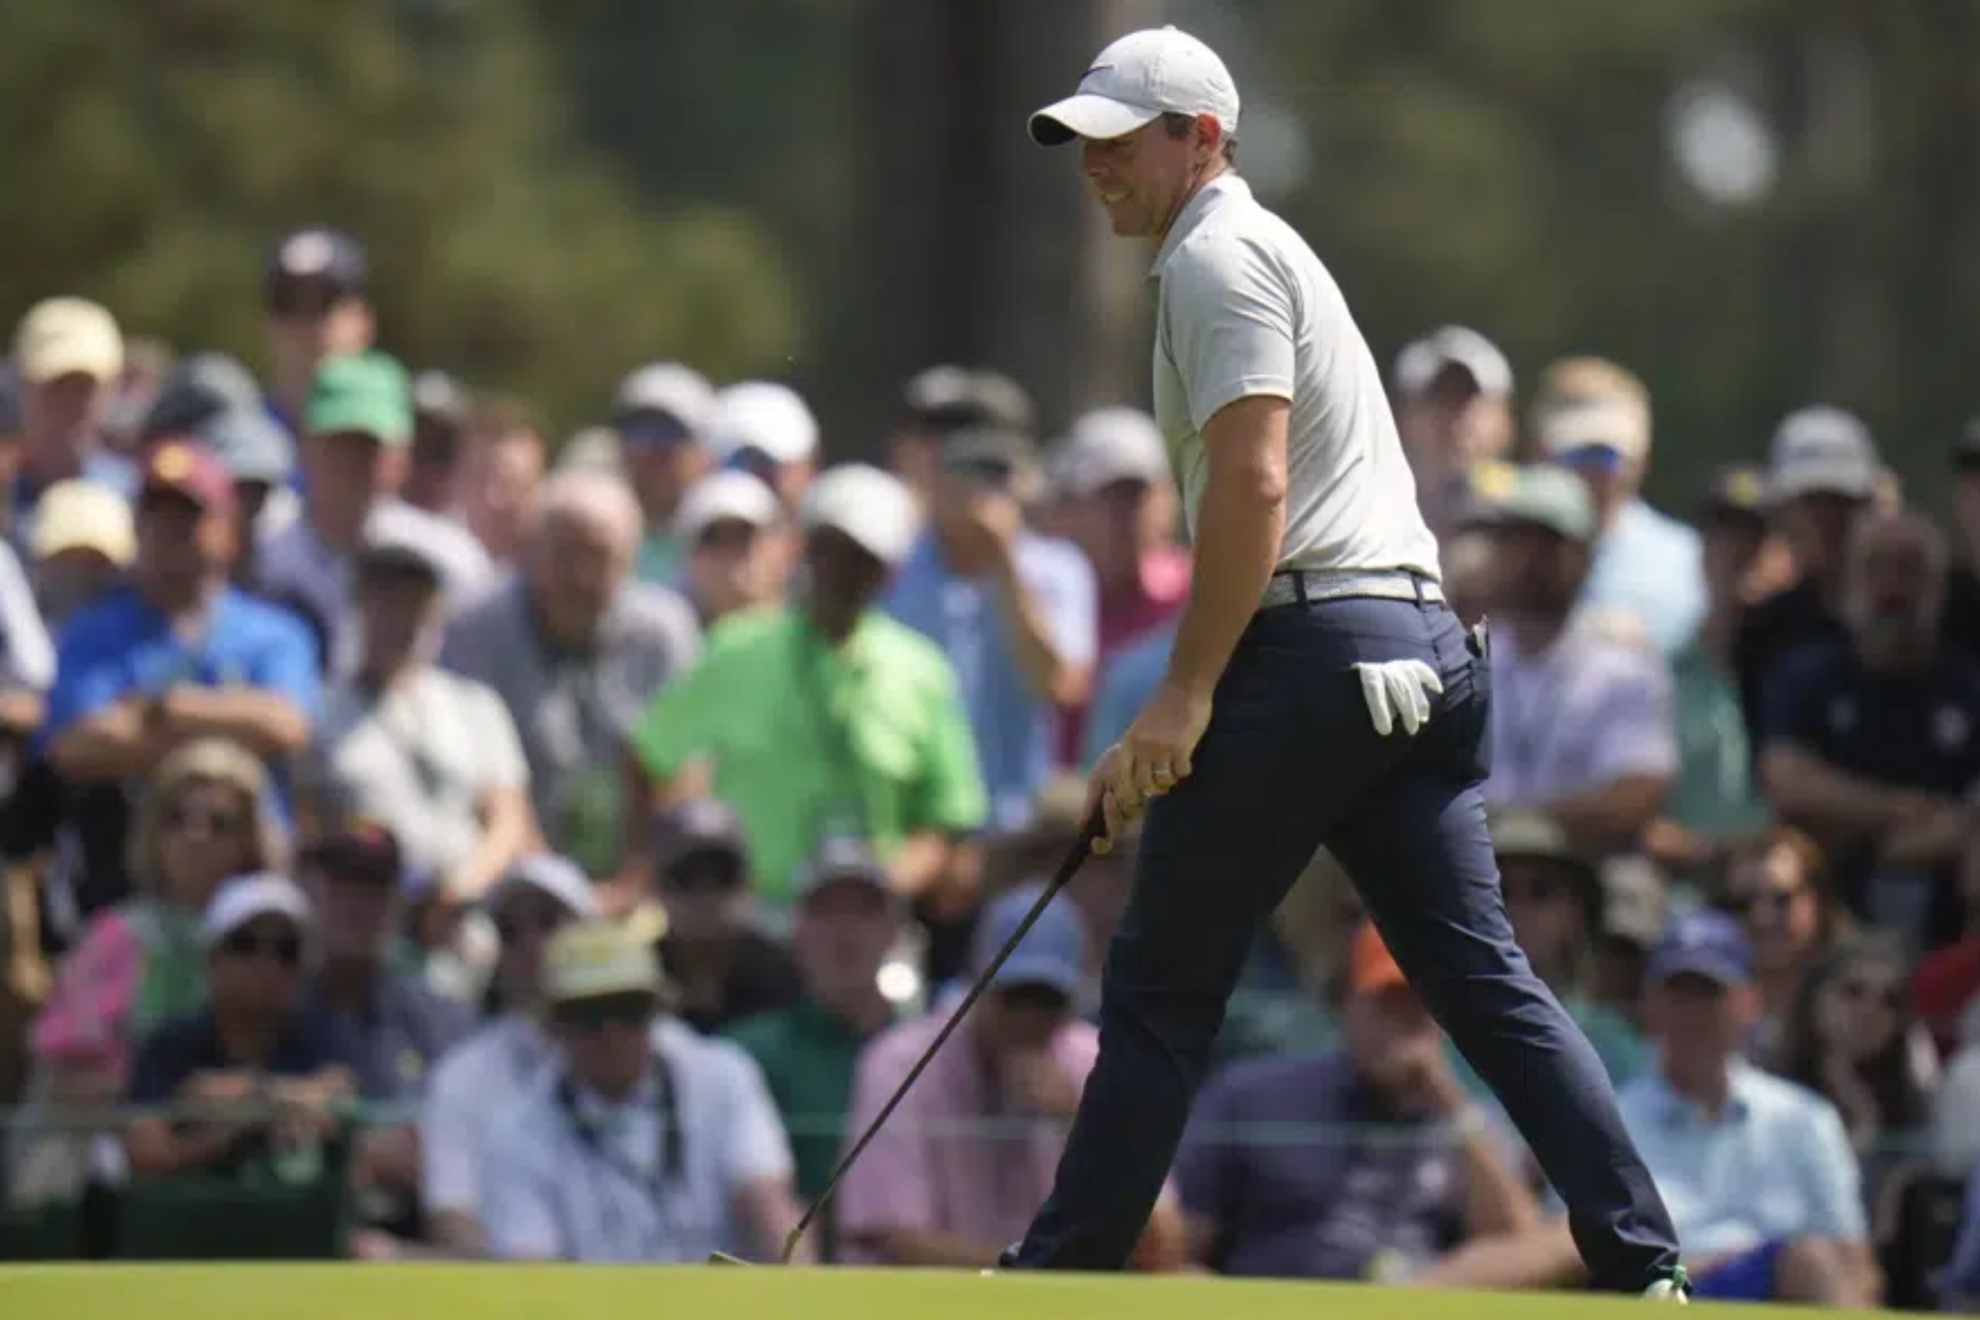 Rory McIlroy during The Masters in Augusta National.